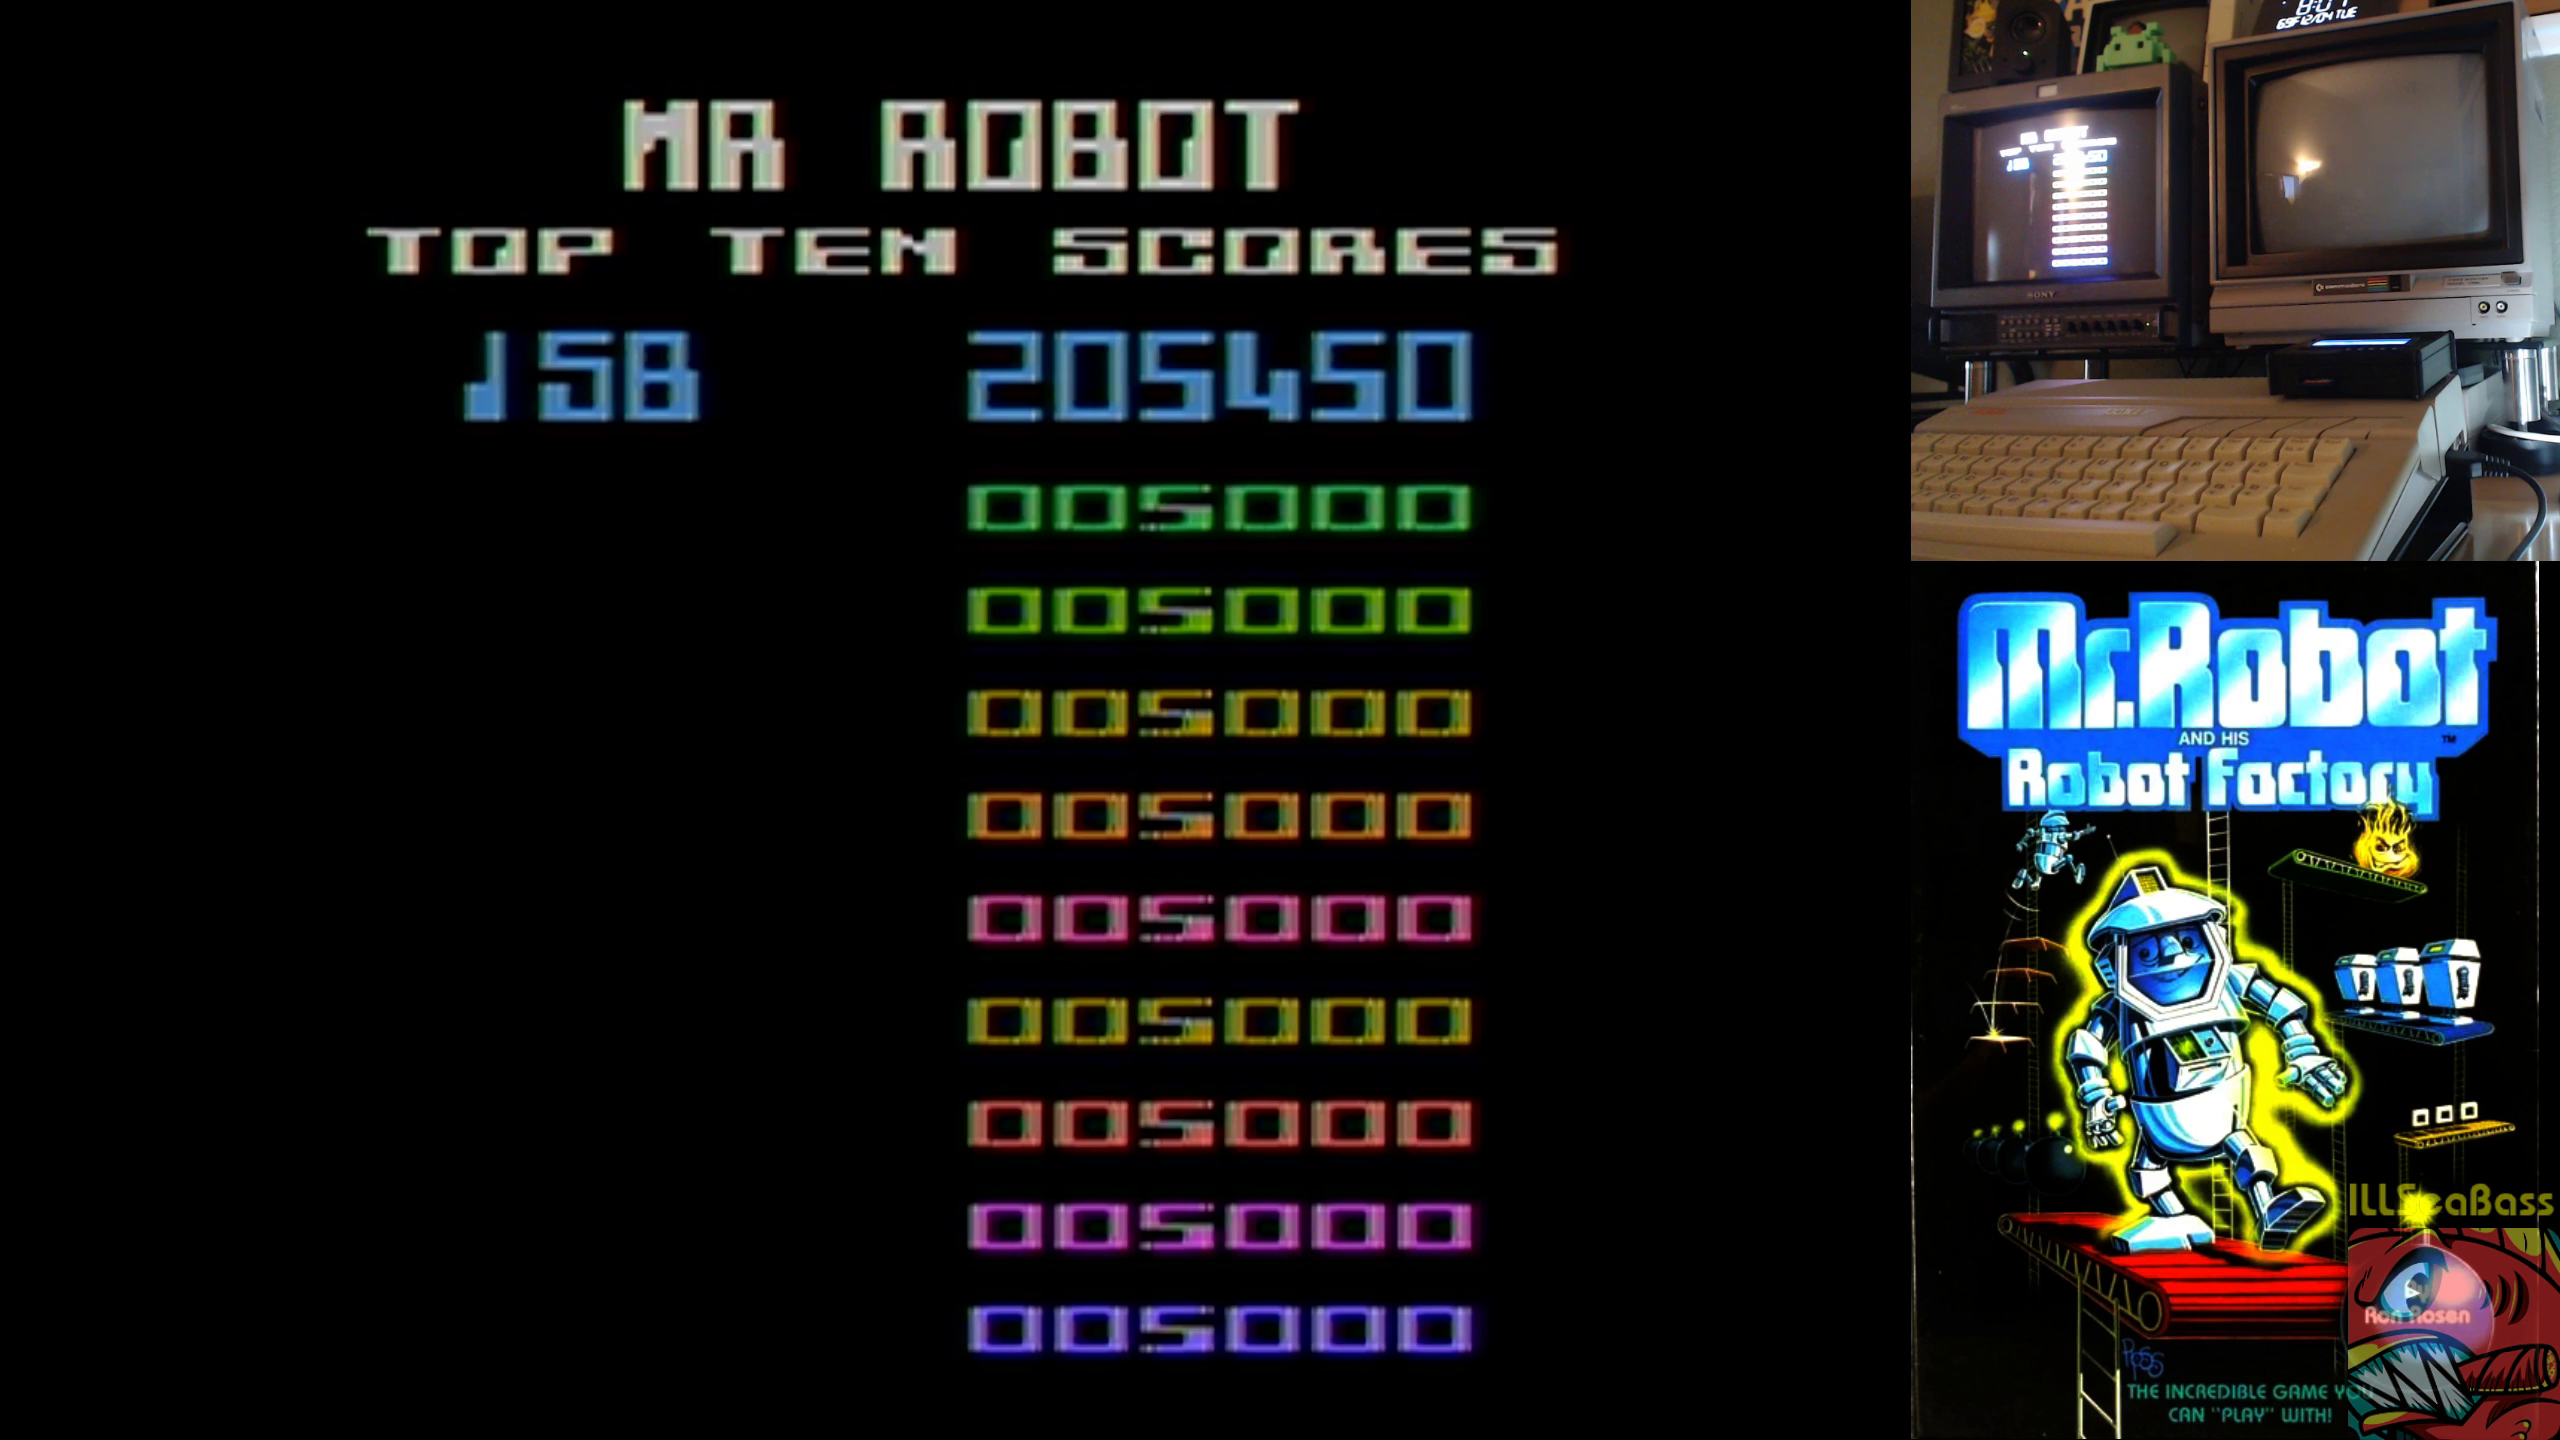 Mr. Robot and His Robot Factory 205,450 points